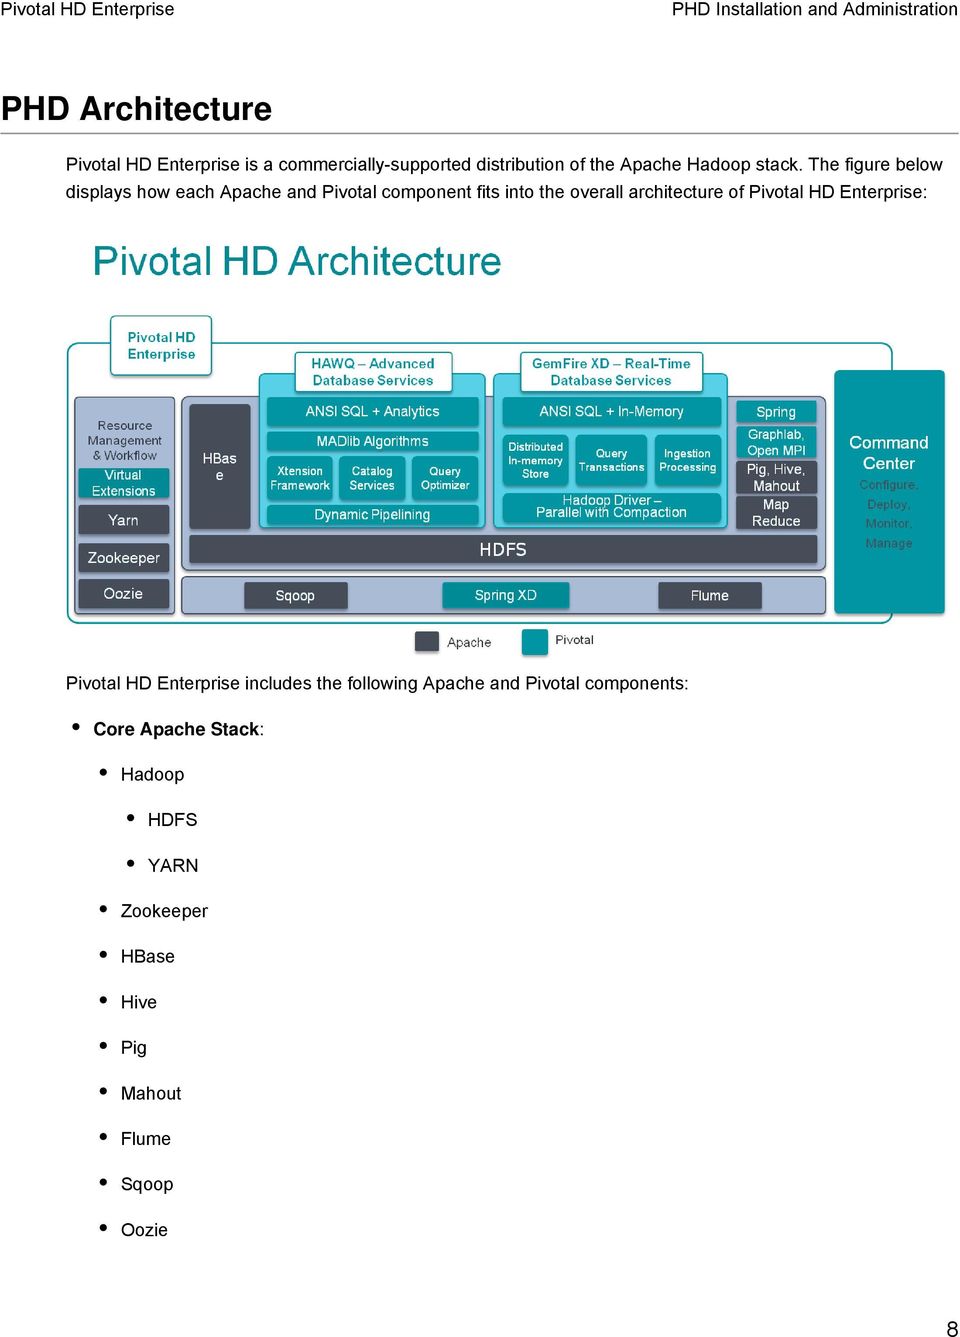 The figure below displays how each Apache and Pivotal component fits into the overall architecture